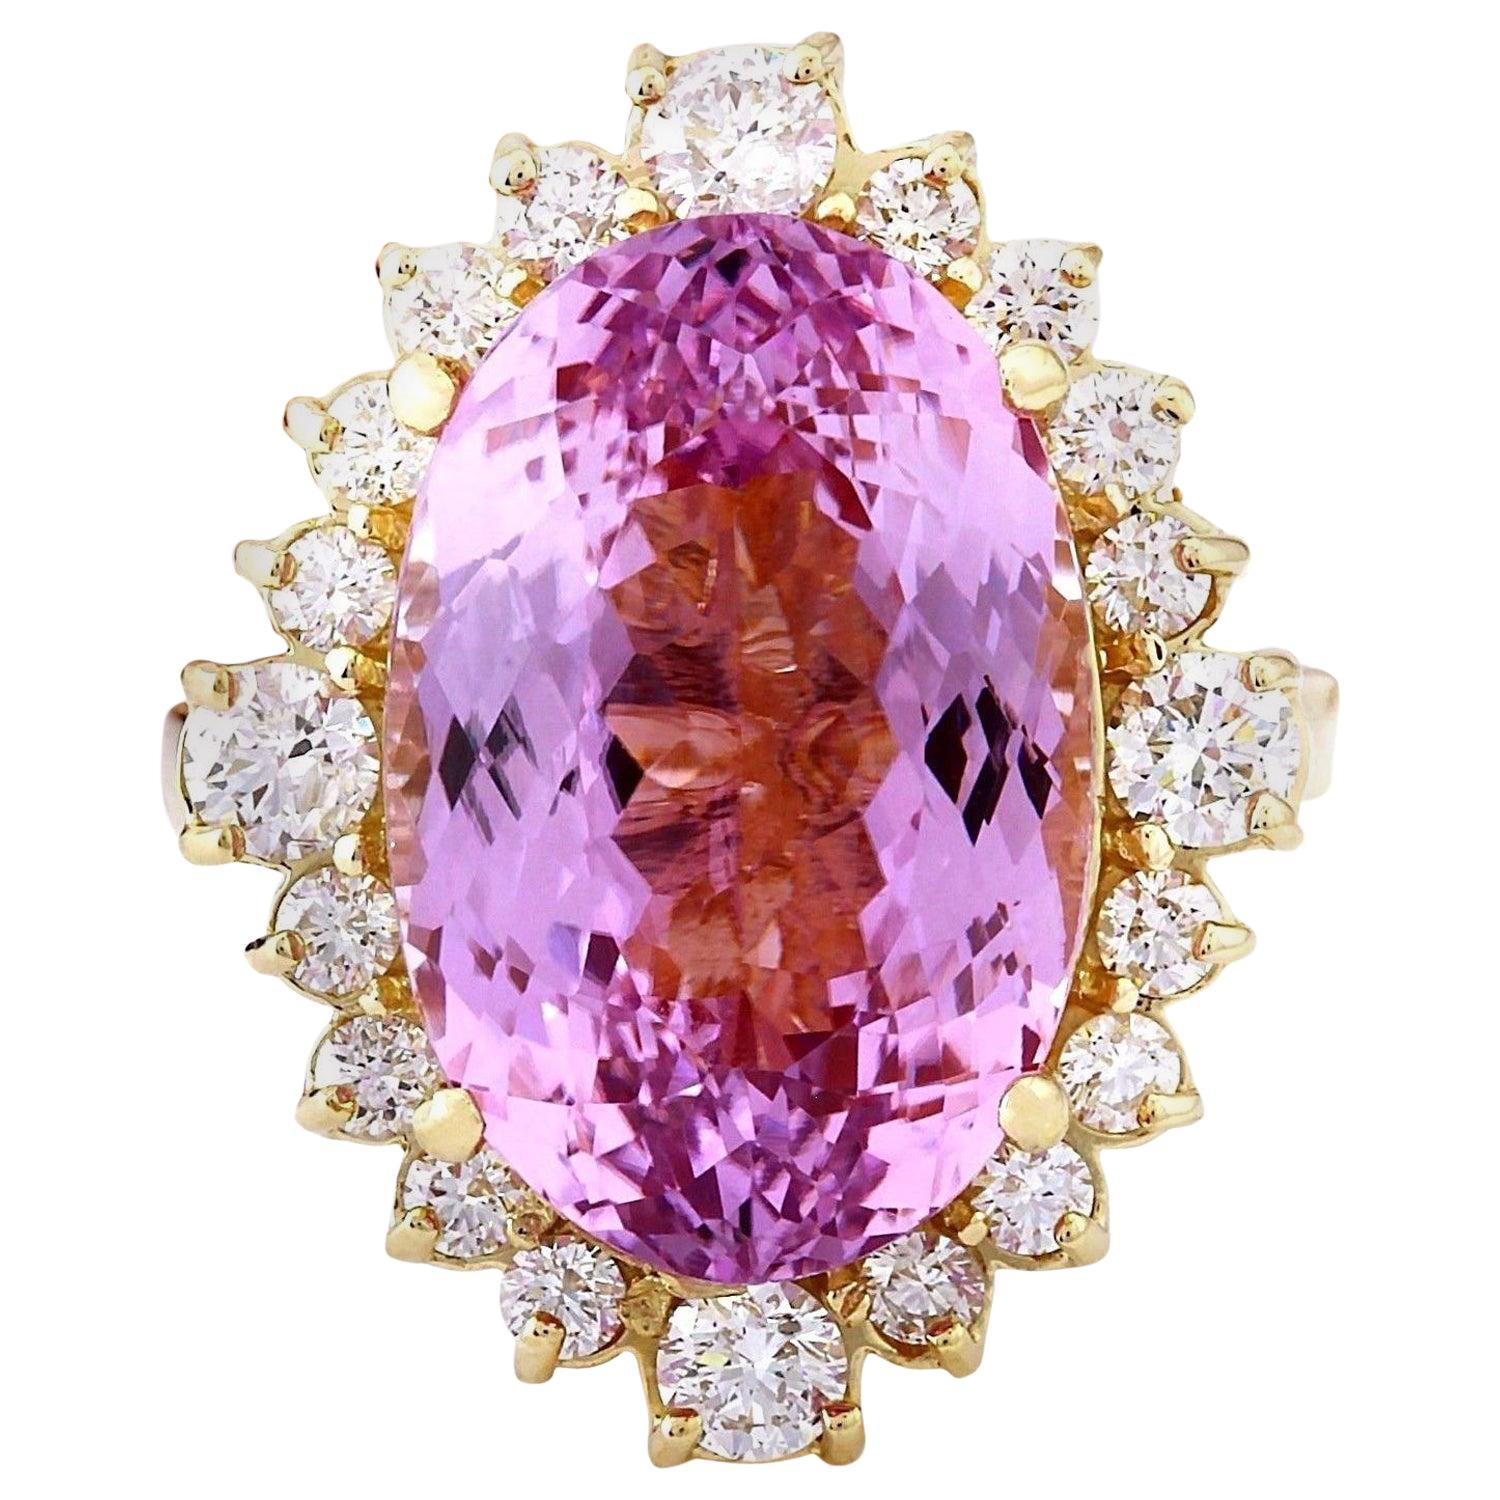 Exquisite Natural Kunzite Diamond Ring In 14 Karat Solid Yellow Gold  For Sale